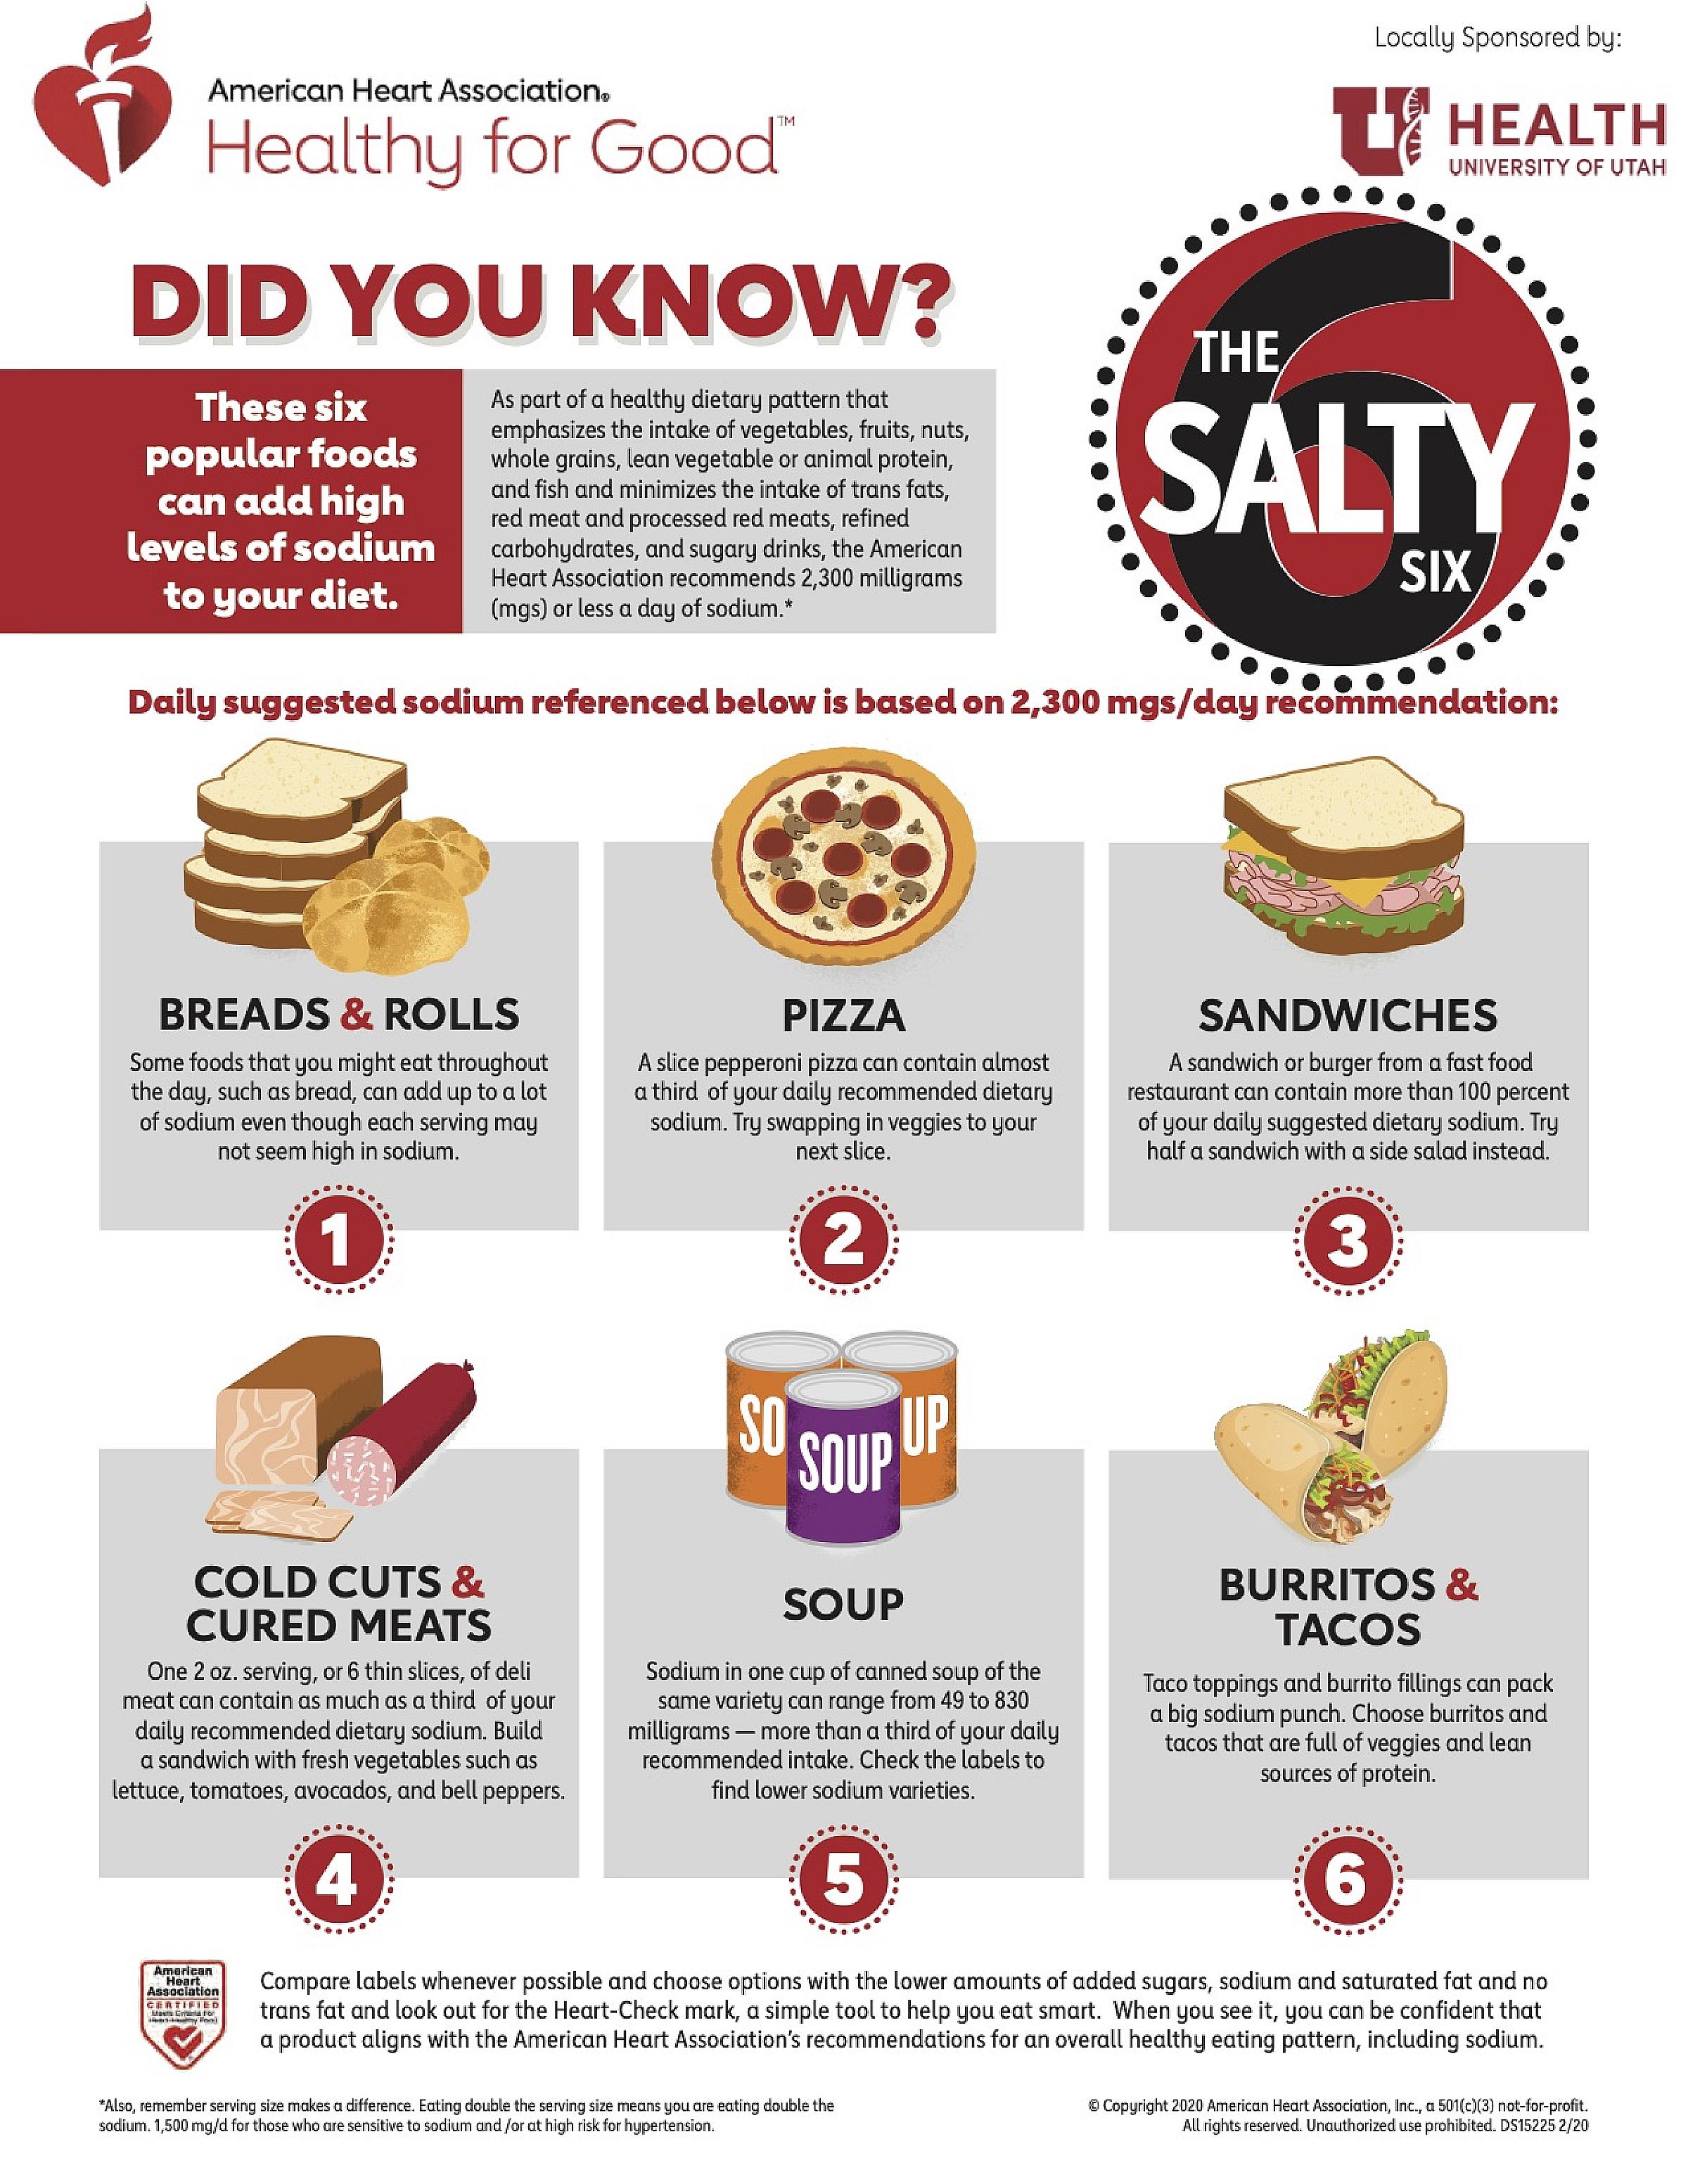 The Salty Six infographic